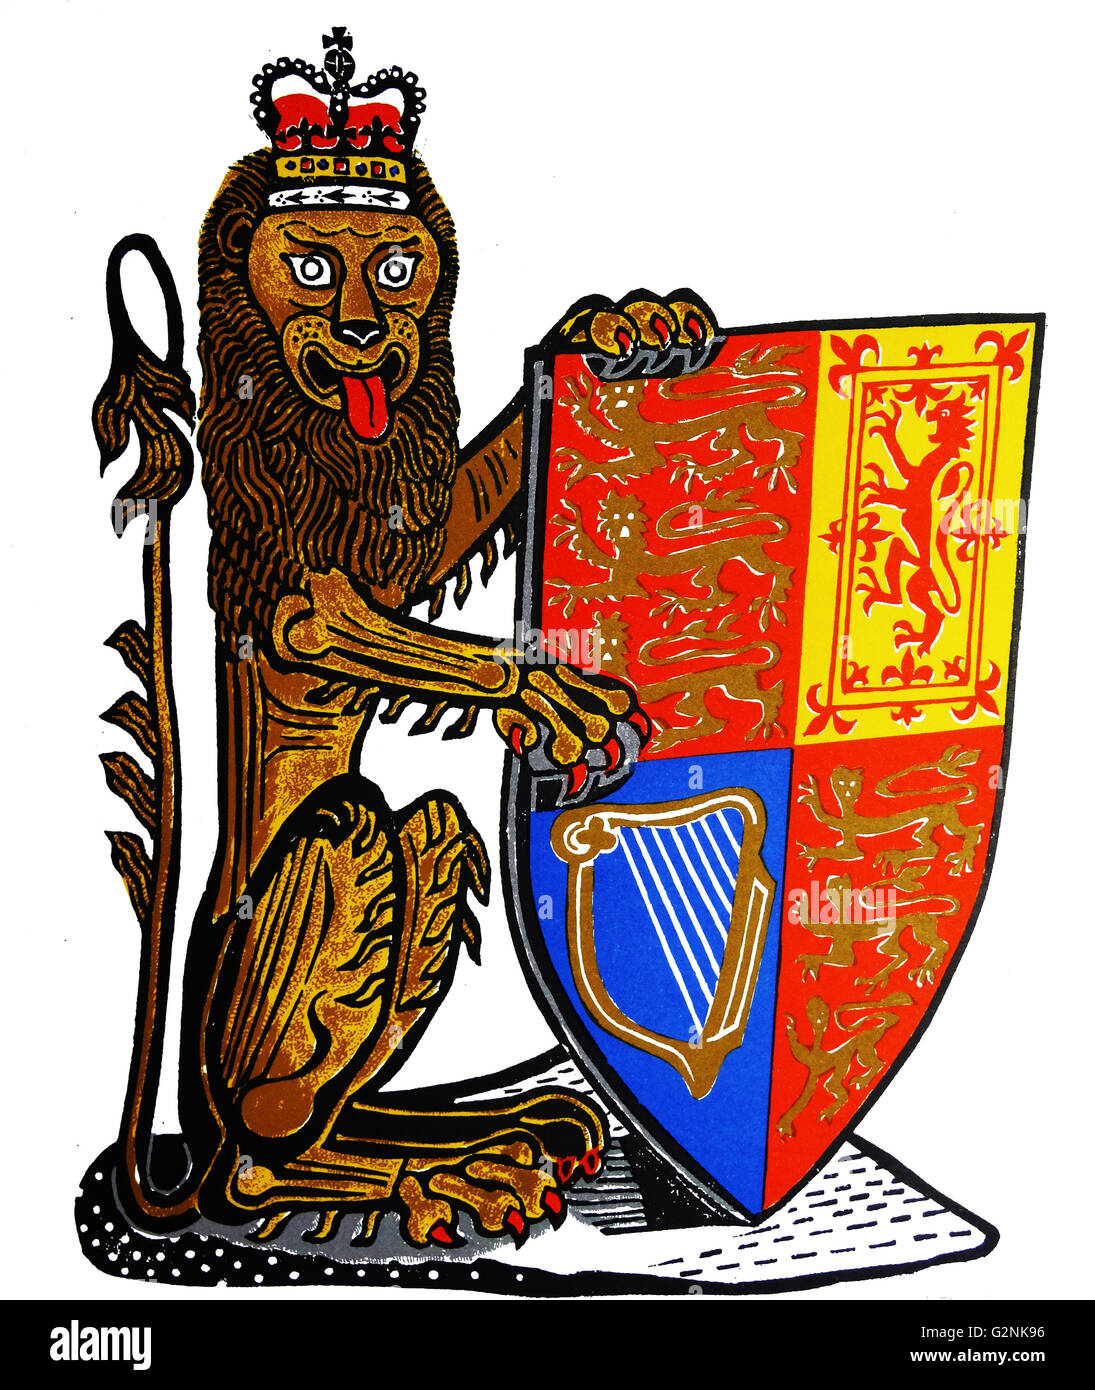 The Heraldic Lion of England. The first and fourth quadrants represent England and contain three gold lions passant on a red field; the second quadrant represents Scotland contains a red lion rampant on a gold field; the third quadrant represents Ireland and contains the gold harp of Ireland on a blue field. Drawn by Edward Bawden CBE RA (1903 – 1989) was an English graphic artist. Stock Photo